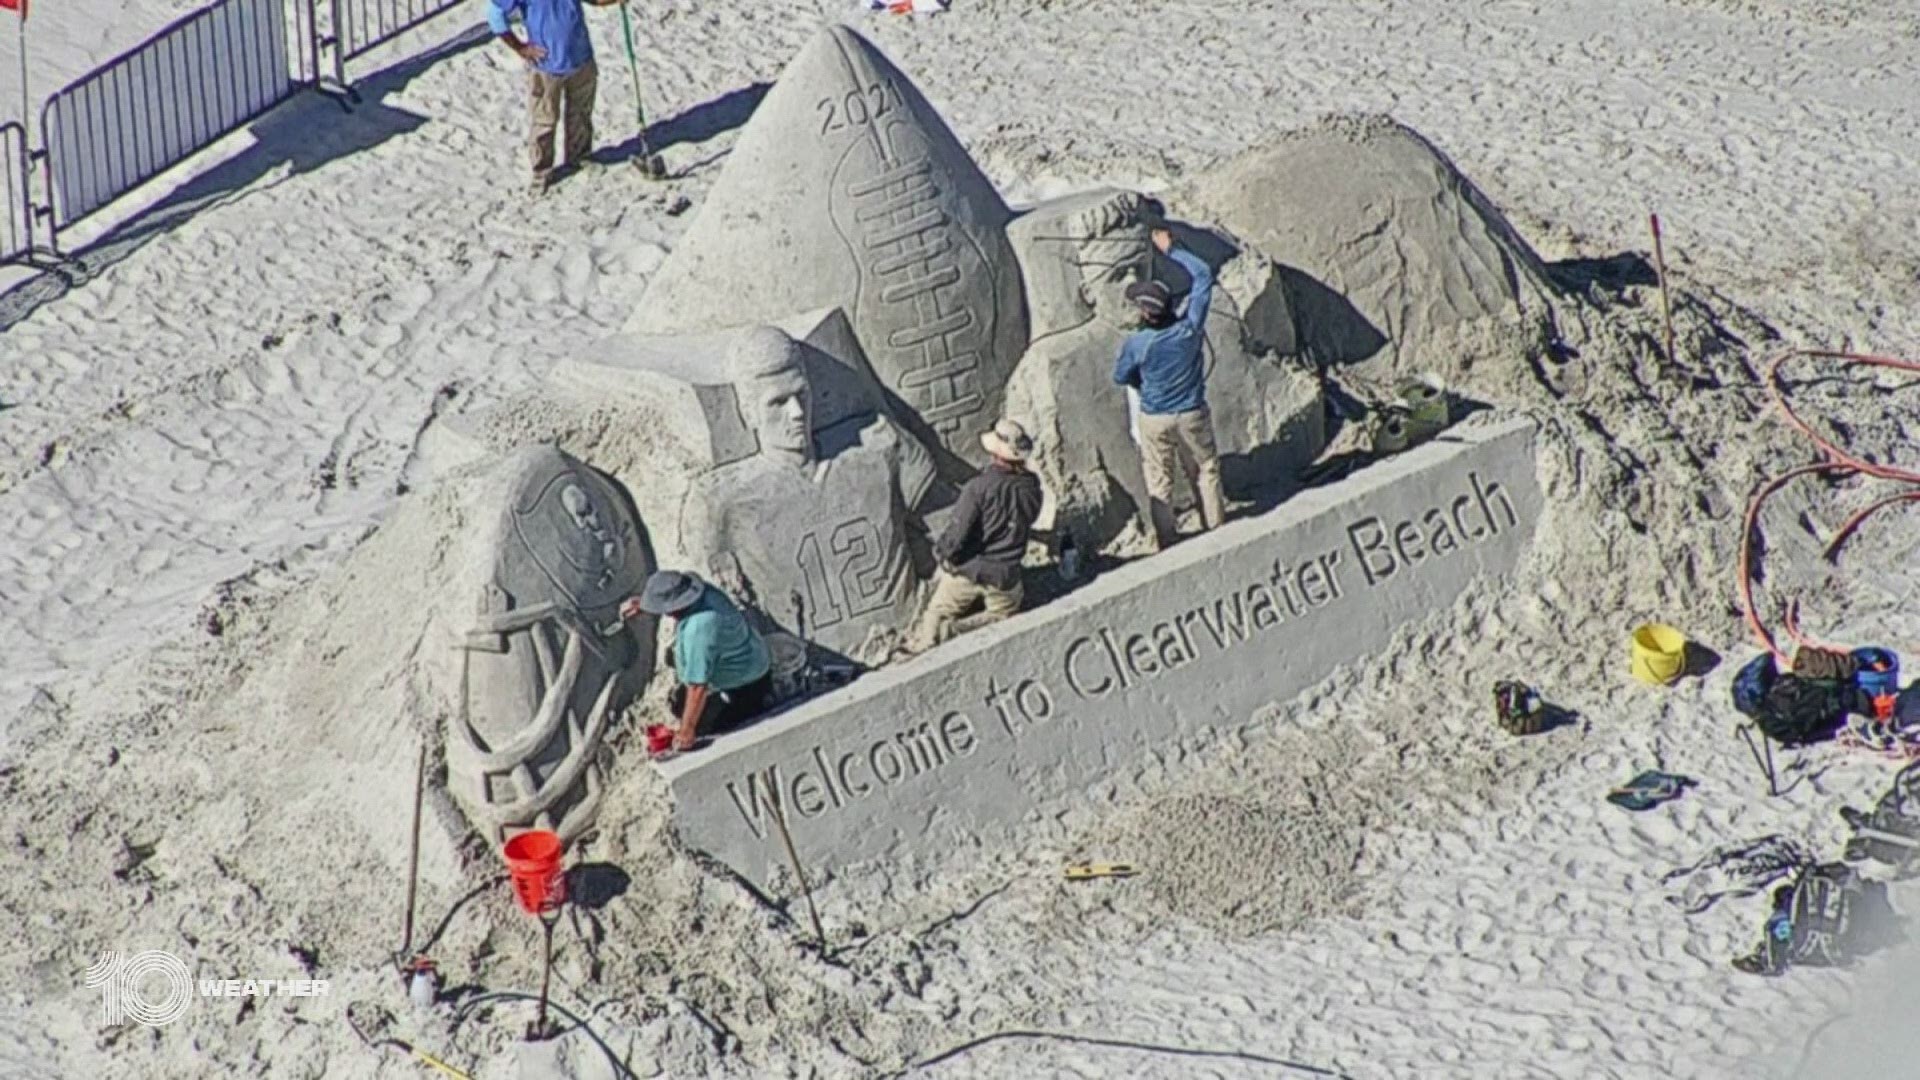 Artists build a super sand sculpture ahead of the big game in Tampa Bay